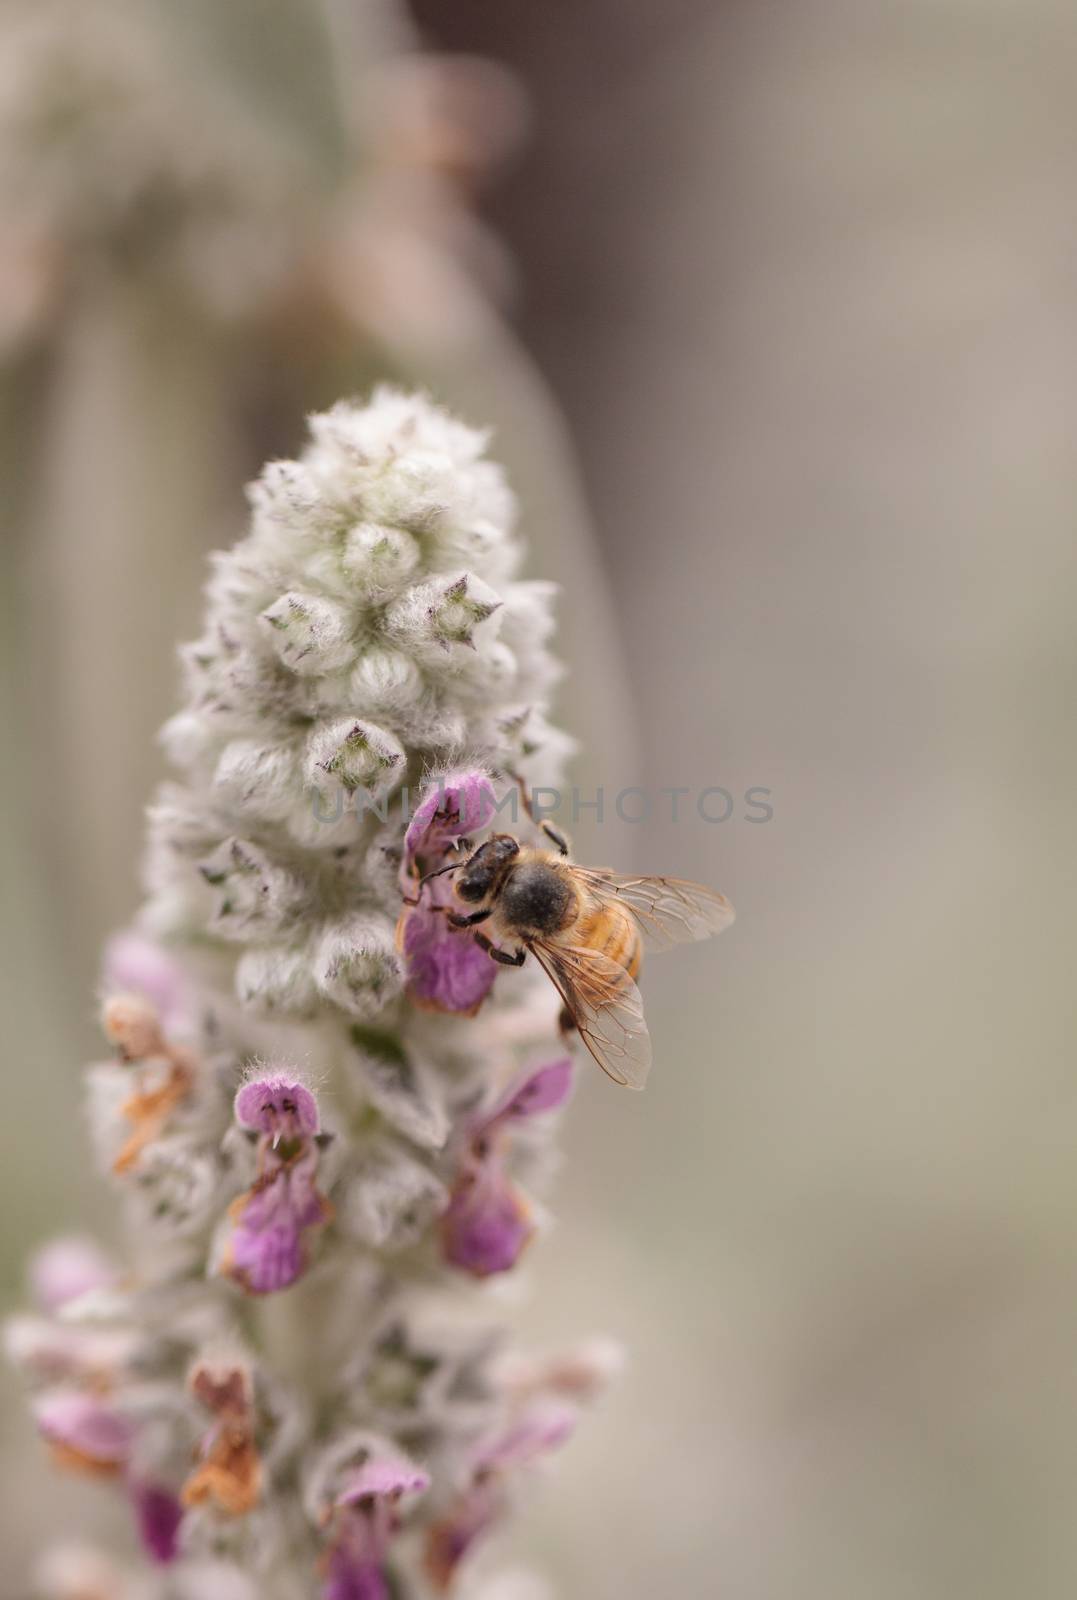 Honeybee, Apis mellifera, gathers pollen on a flower in spring in Southern California, United States.